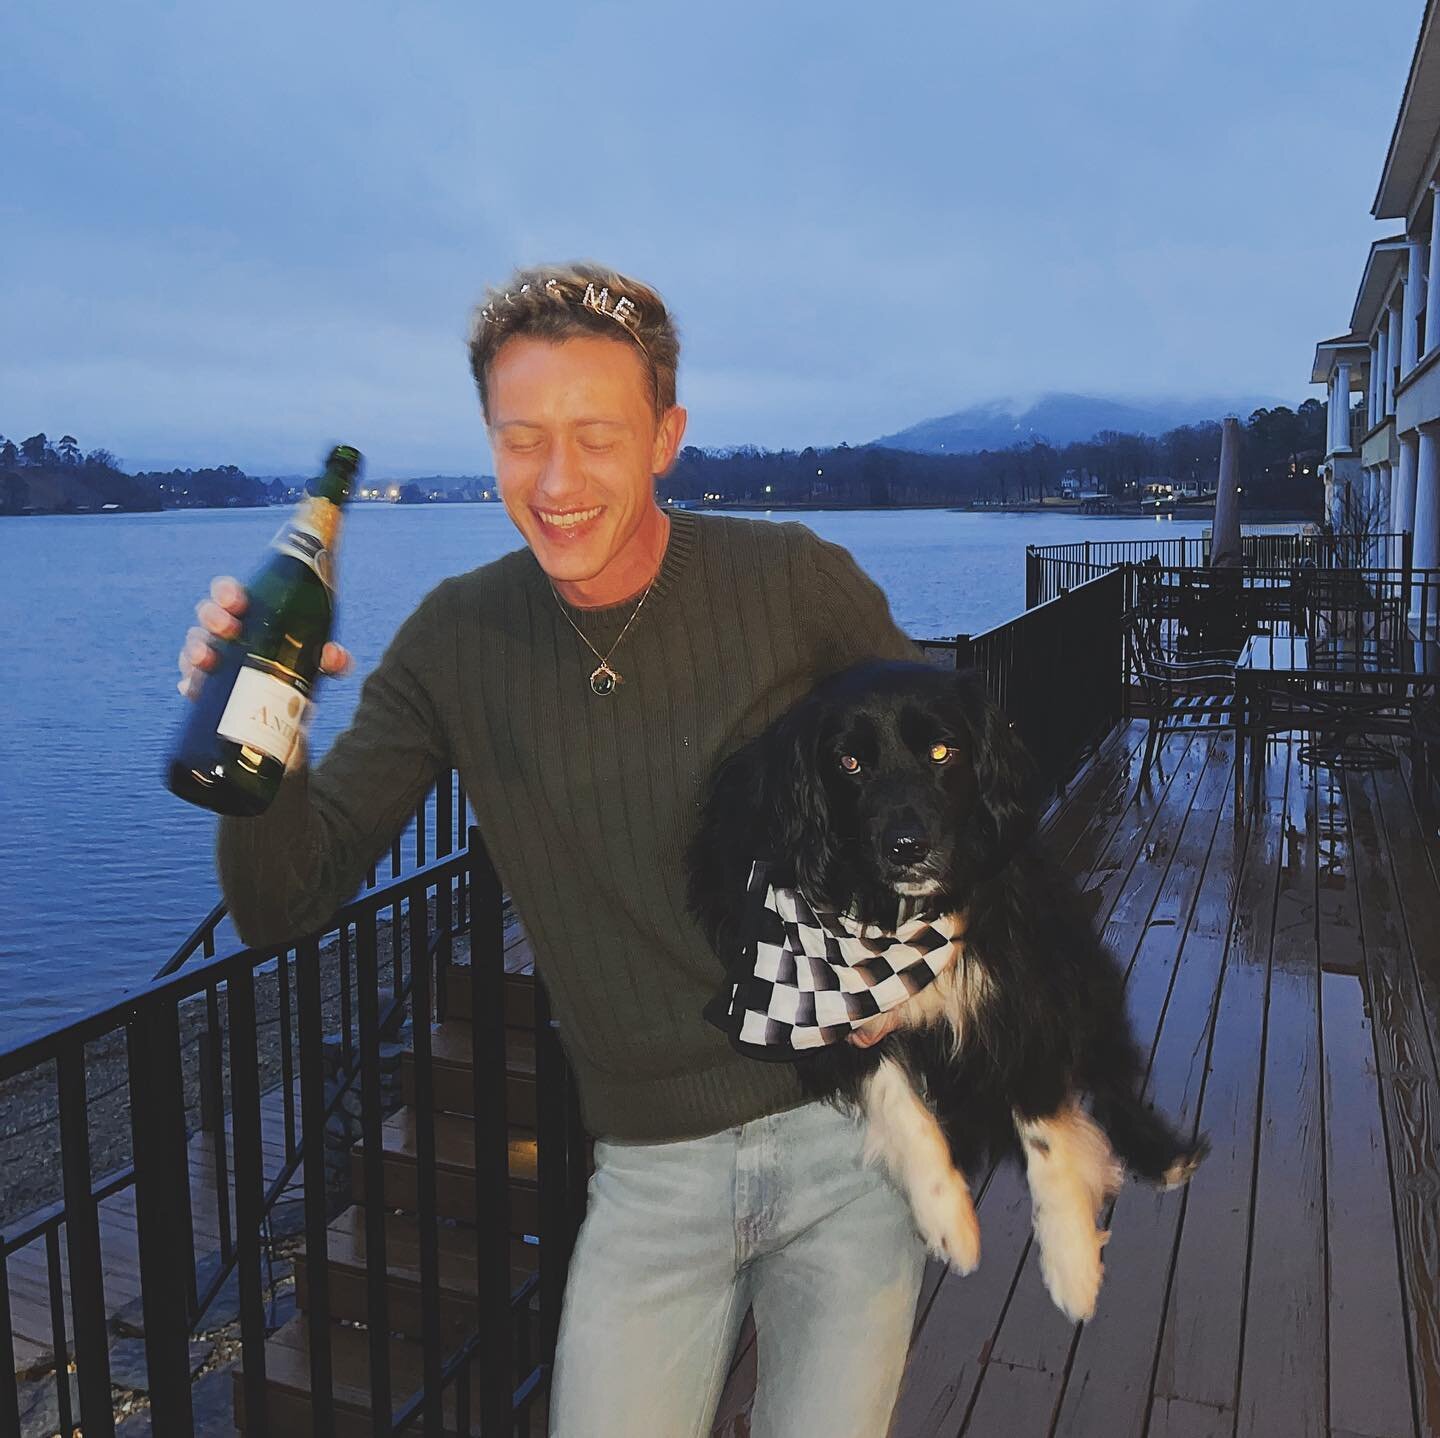 Not my dog, not my champagne. Let&rsquo;s try again in &lsquo;21.